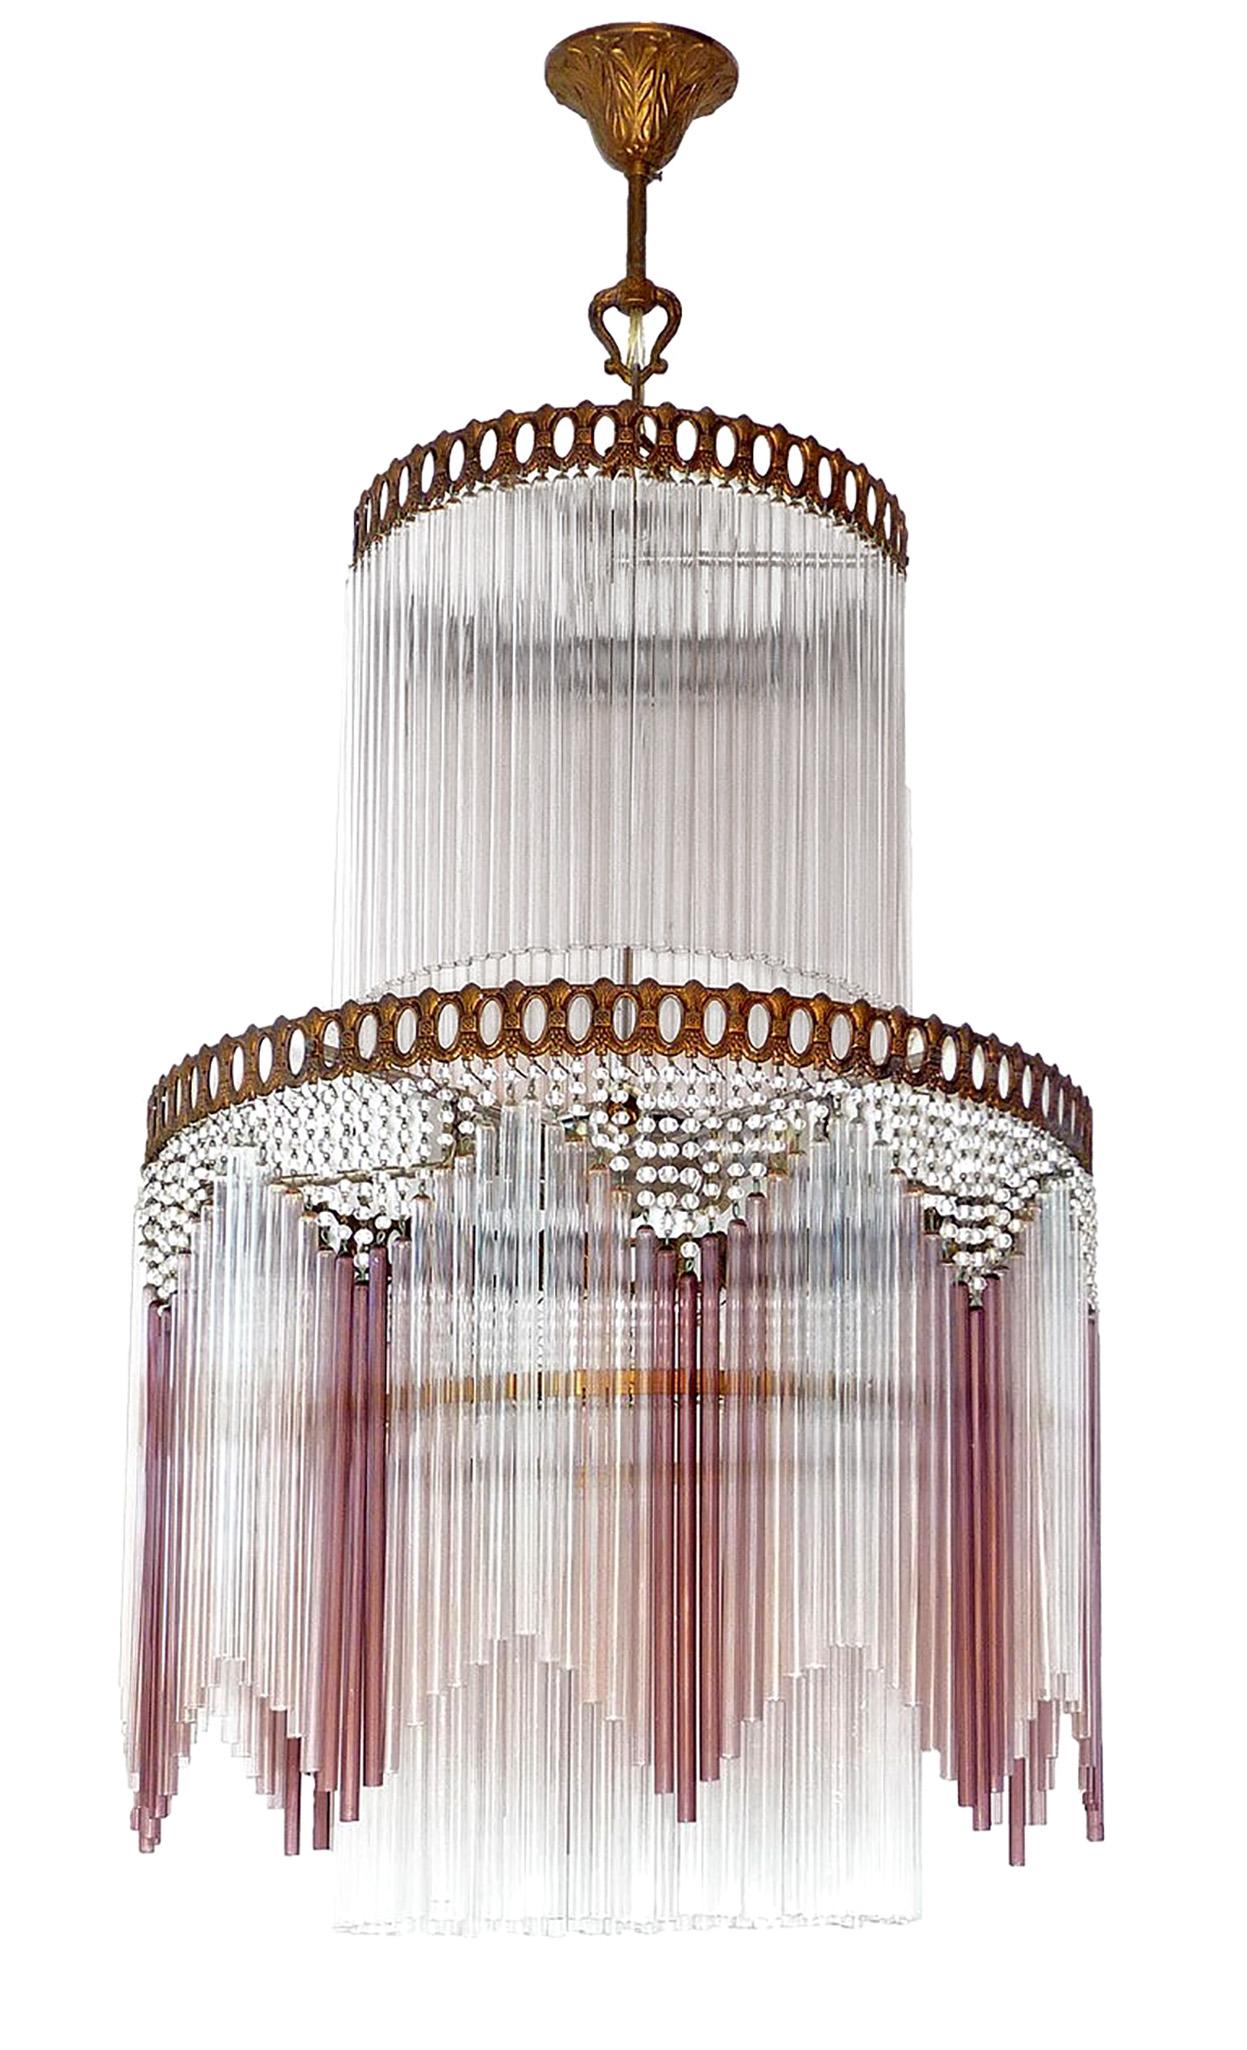 Fabulous French Art Deco and Art Nouveau gilt chandelier with glass beads and pink glass straws.
Measures:
Diameter 16 in/ 40 cm
Height 36 in/ 90 cm
Weight 12 lb/ 5 Kg
5 light bulbs E14/ good working condition/European wiring.
Your item will